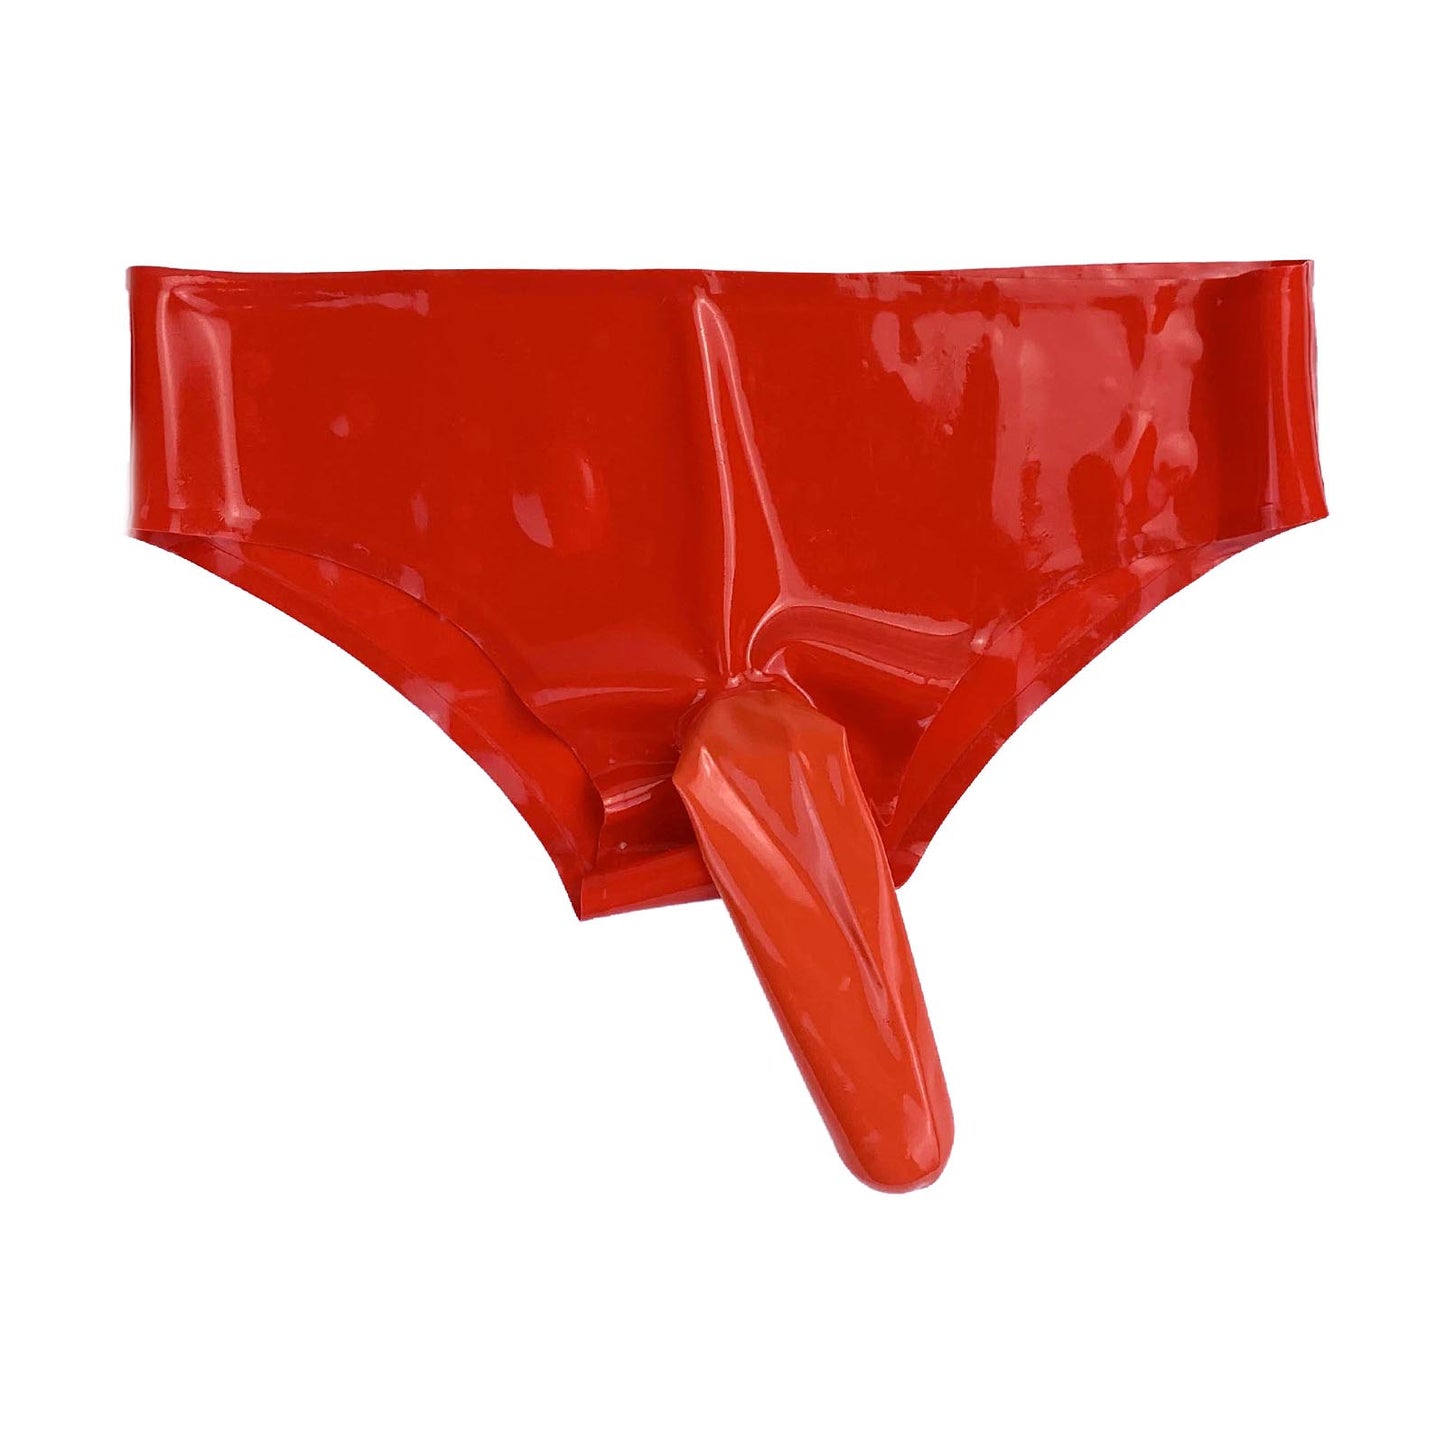 MONNIK Latex Thong Red Briefs with 18cm Condom for Bodysuit Gay Play Customizable